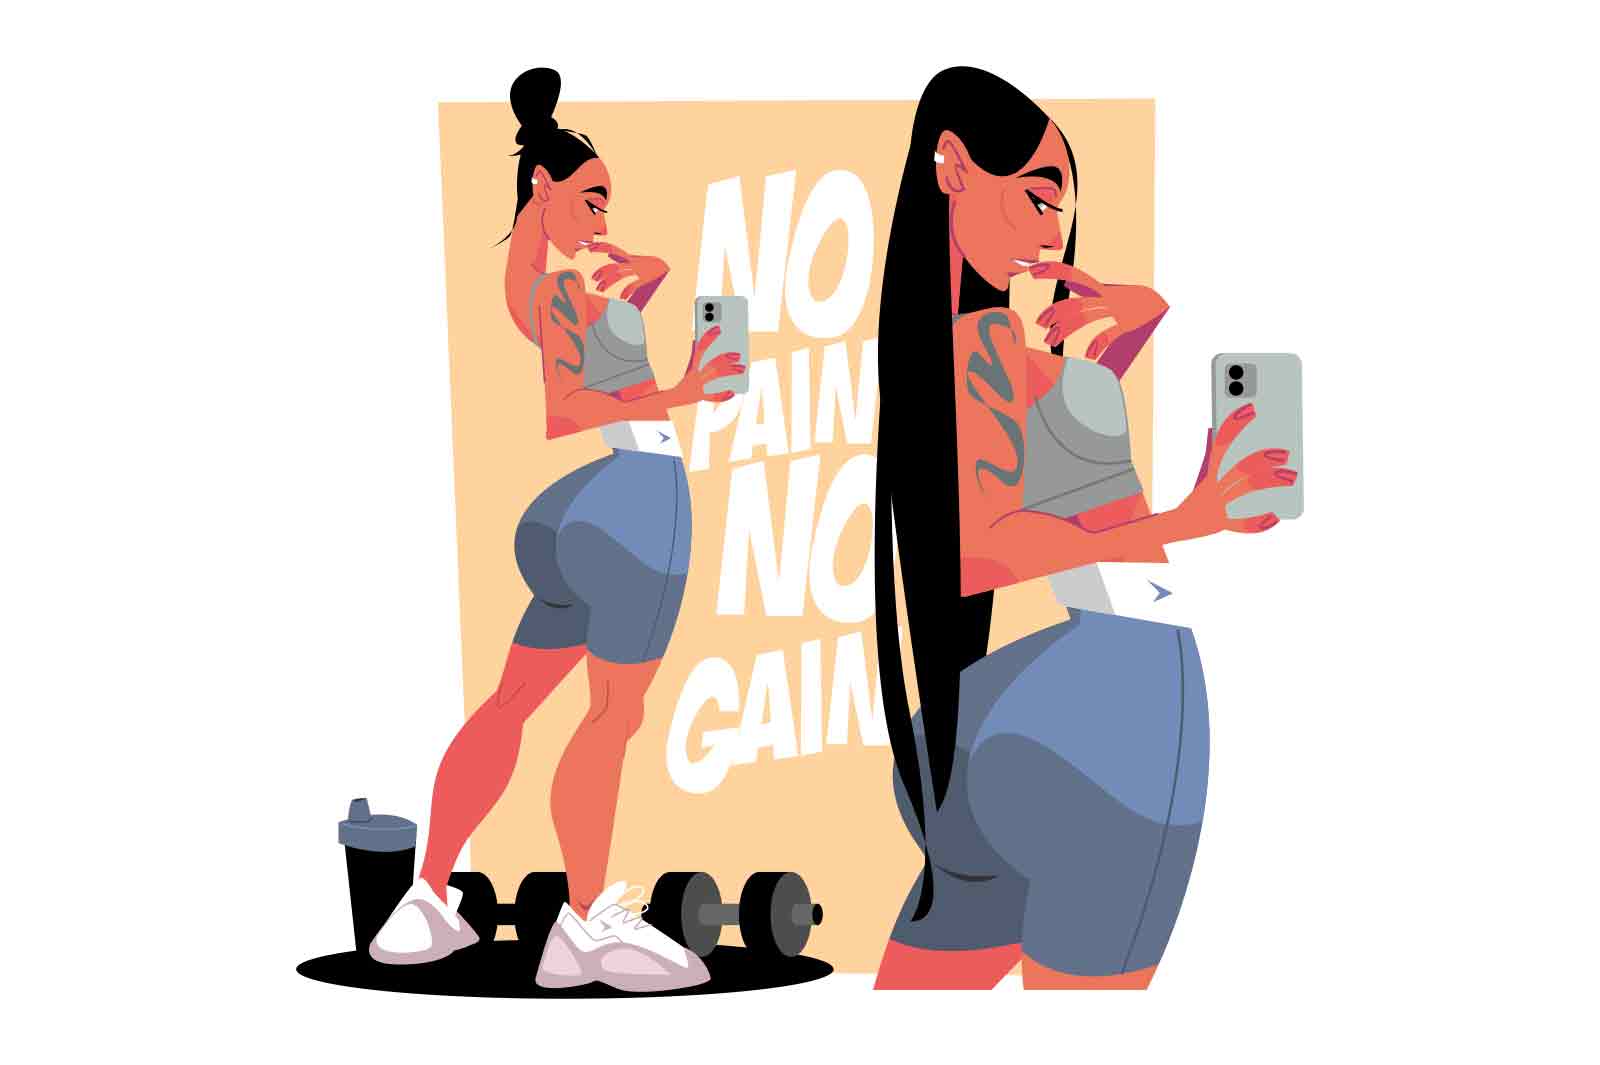 Girl doing selfie in gym, vector illustration. Talking photo for social networks during sports session.